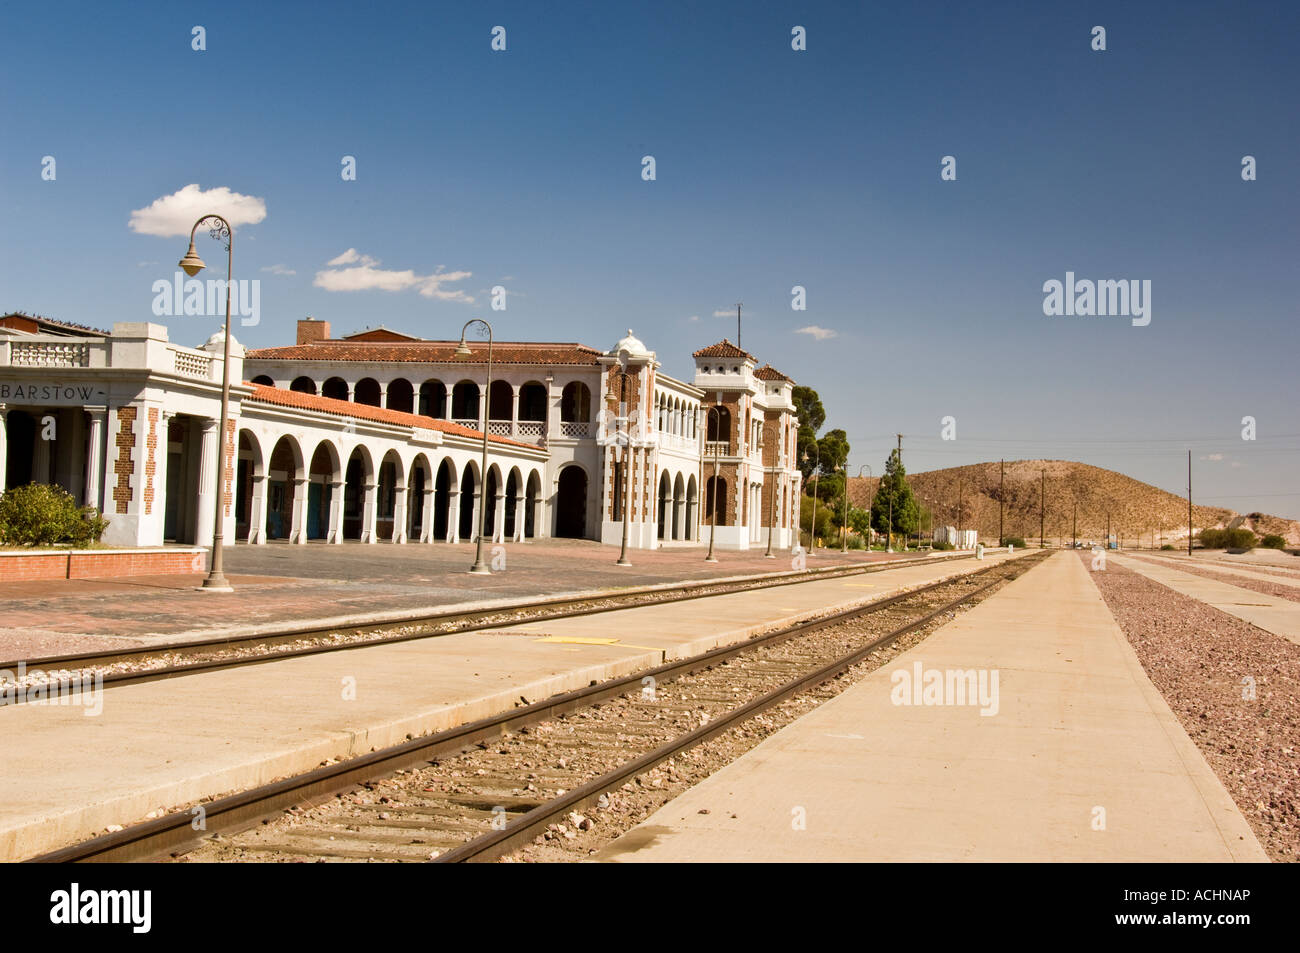 Remodeled train station in Barstow, California, USA Stock Photo